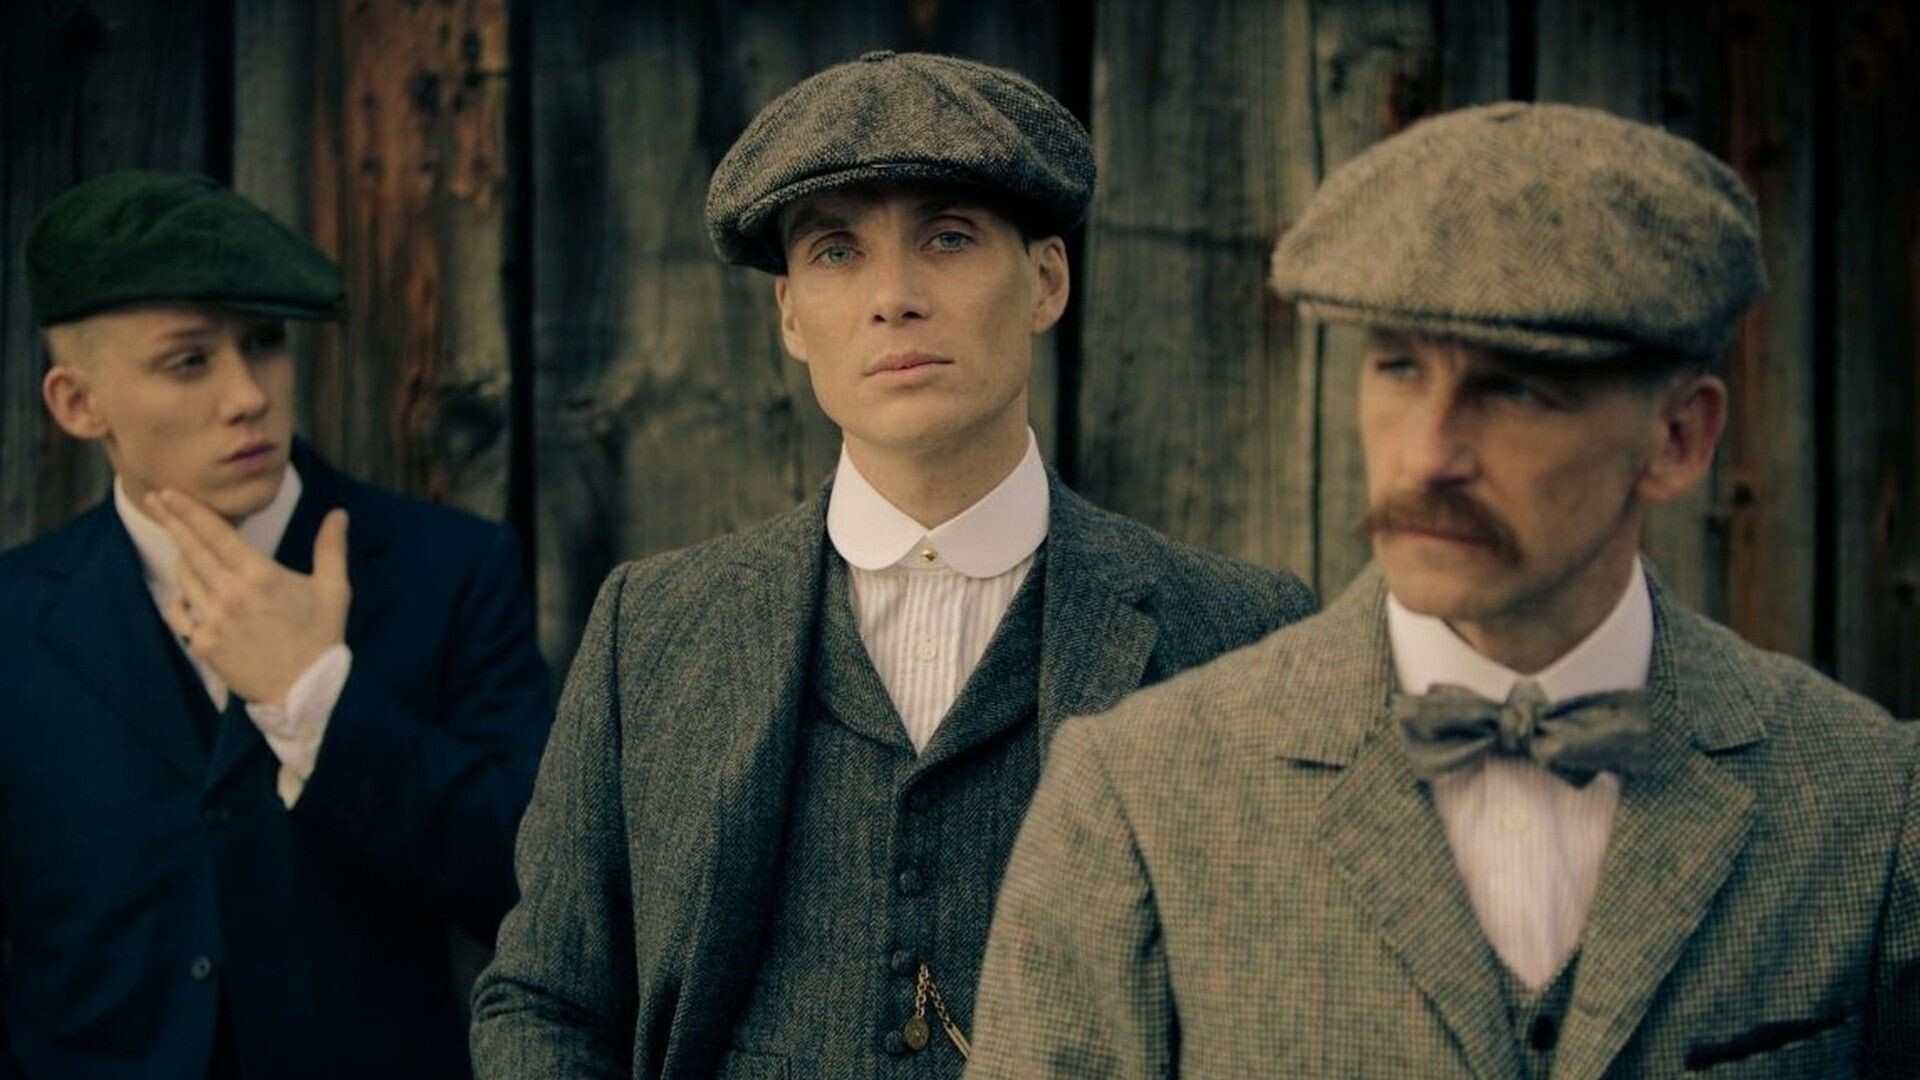 Peaky Blinders: A notorious gang in 1919 Birmingham, England, Fierce Tommy Shelby, a crime boss set on moving up in the world no matter the cost. 1920x1080 Full HD Wallpaper.